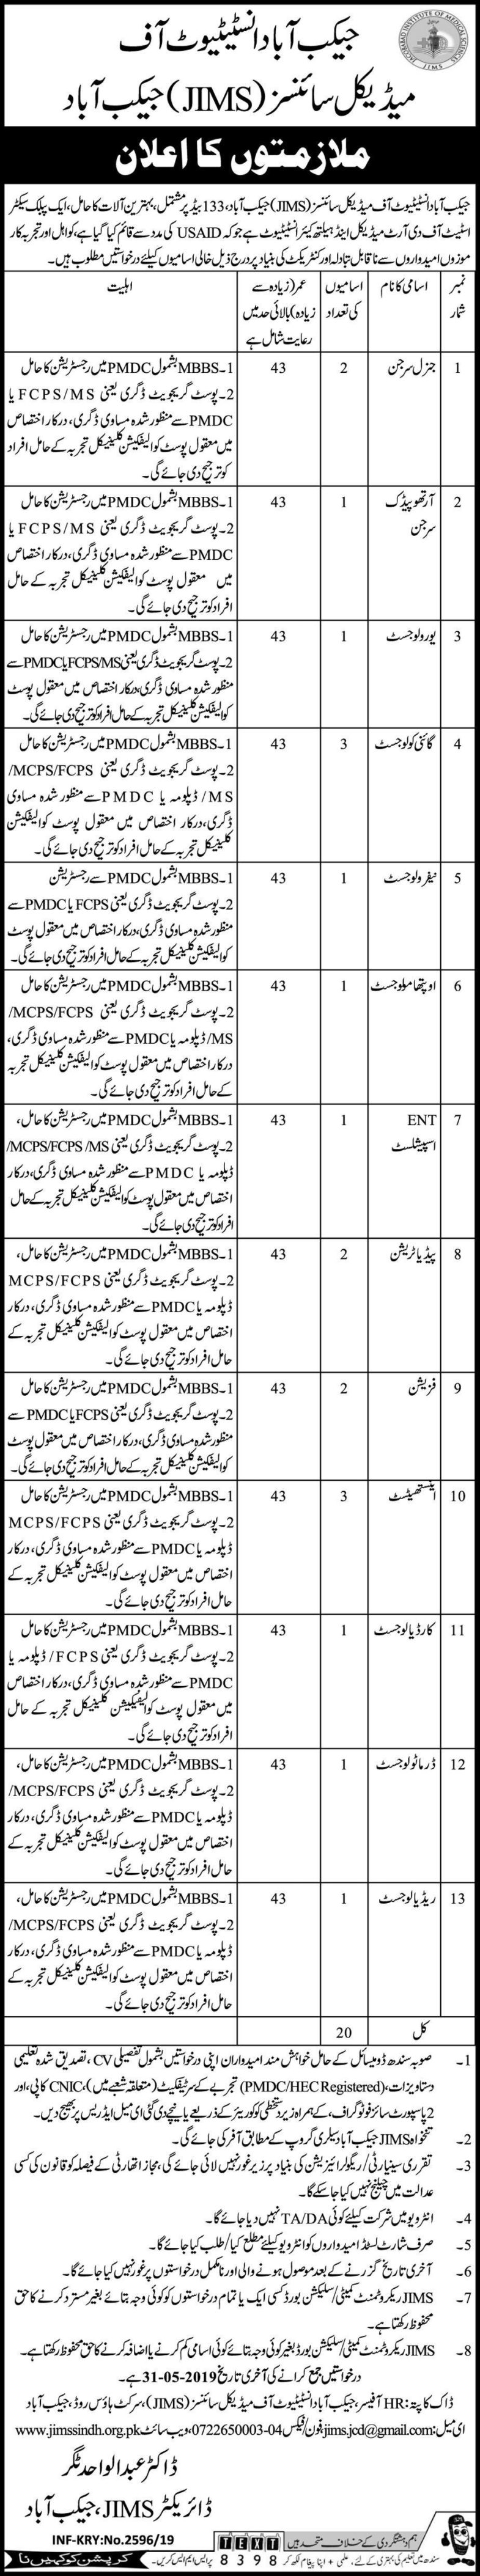 JIMS Institute Jacobabad Jobs 2019 for 20+ Medical & Specialist Posts